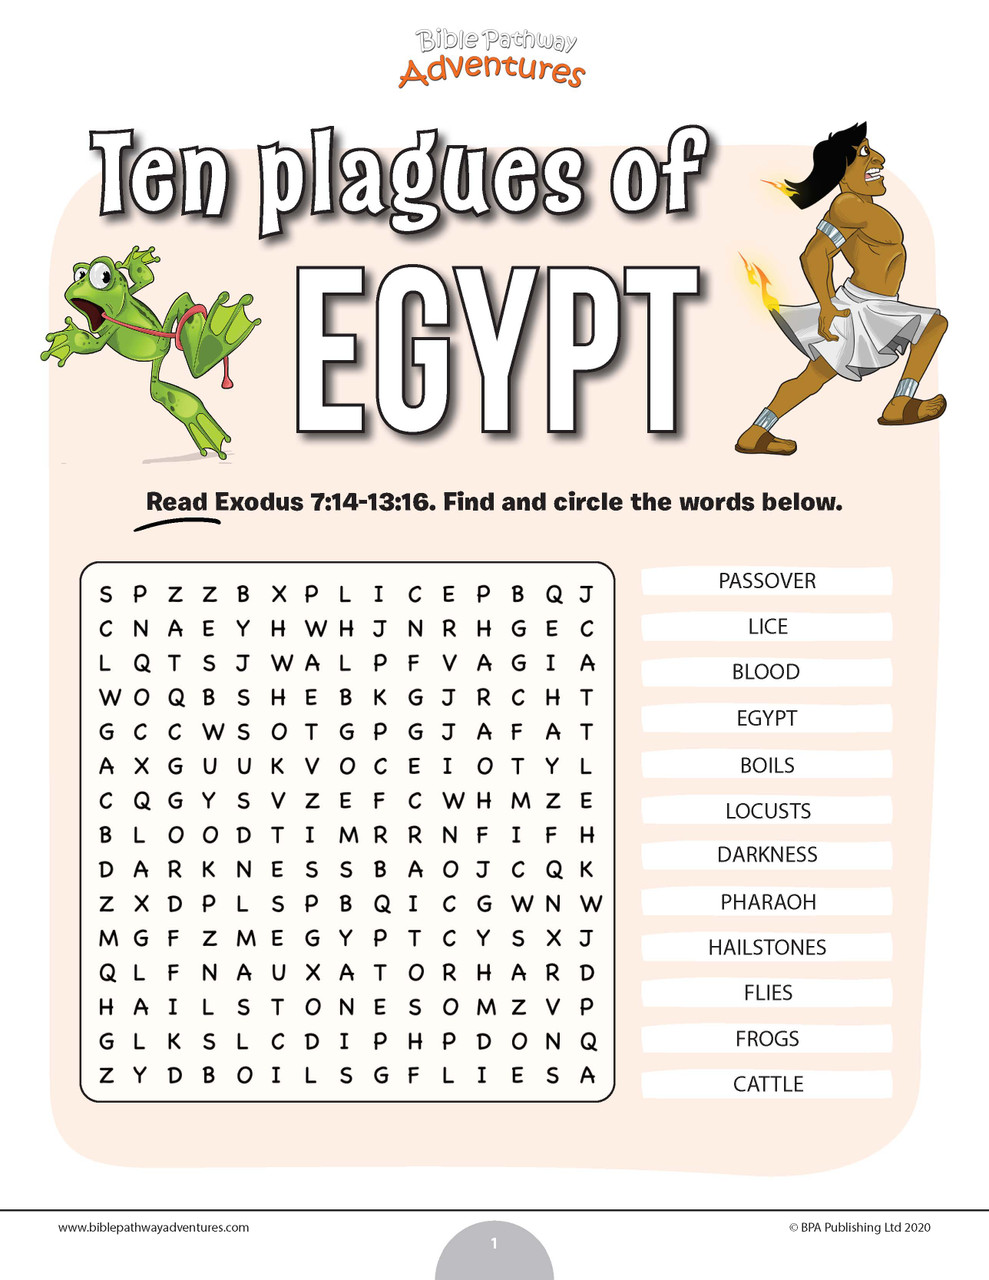 Ten Plagues of Egypt word search puzzle